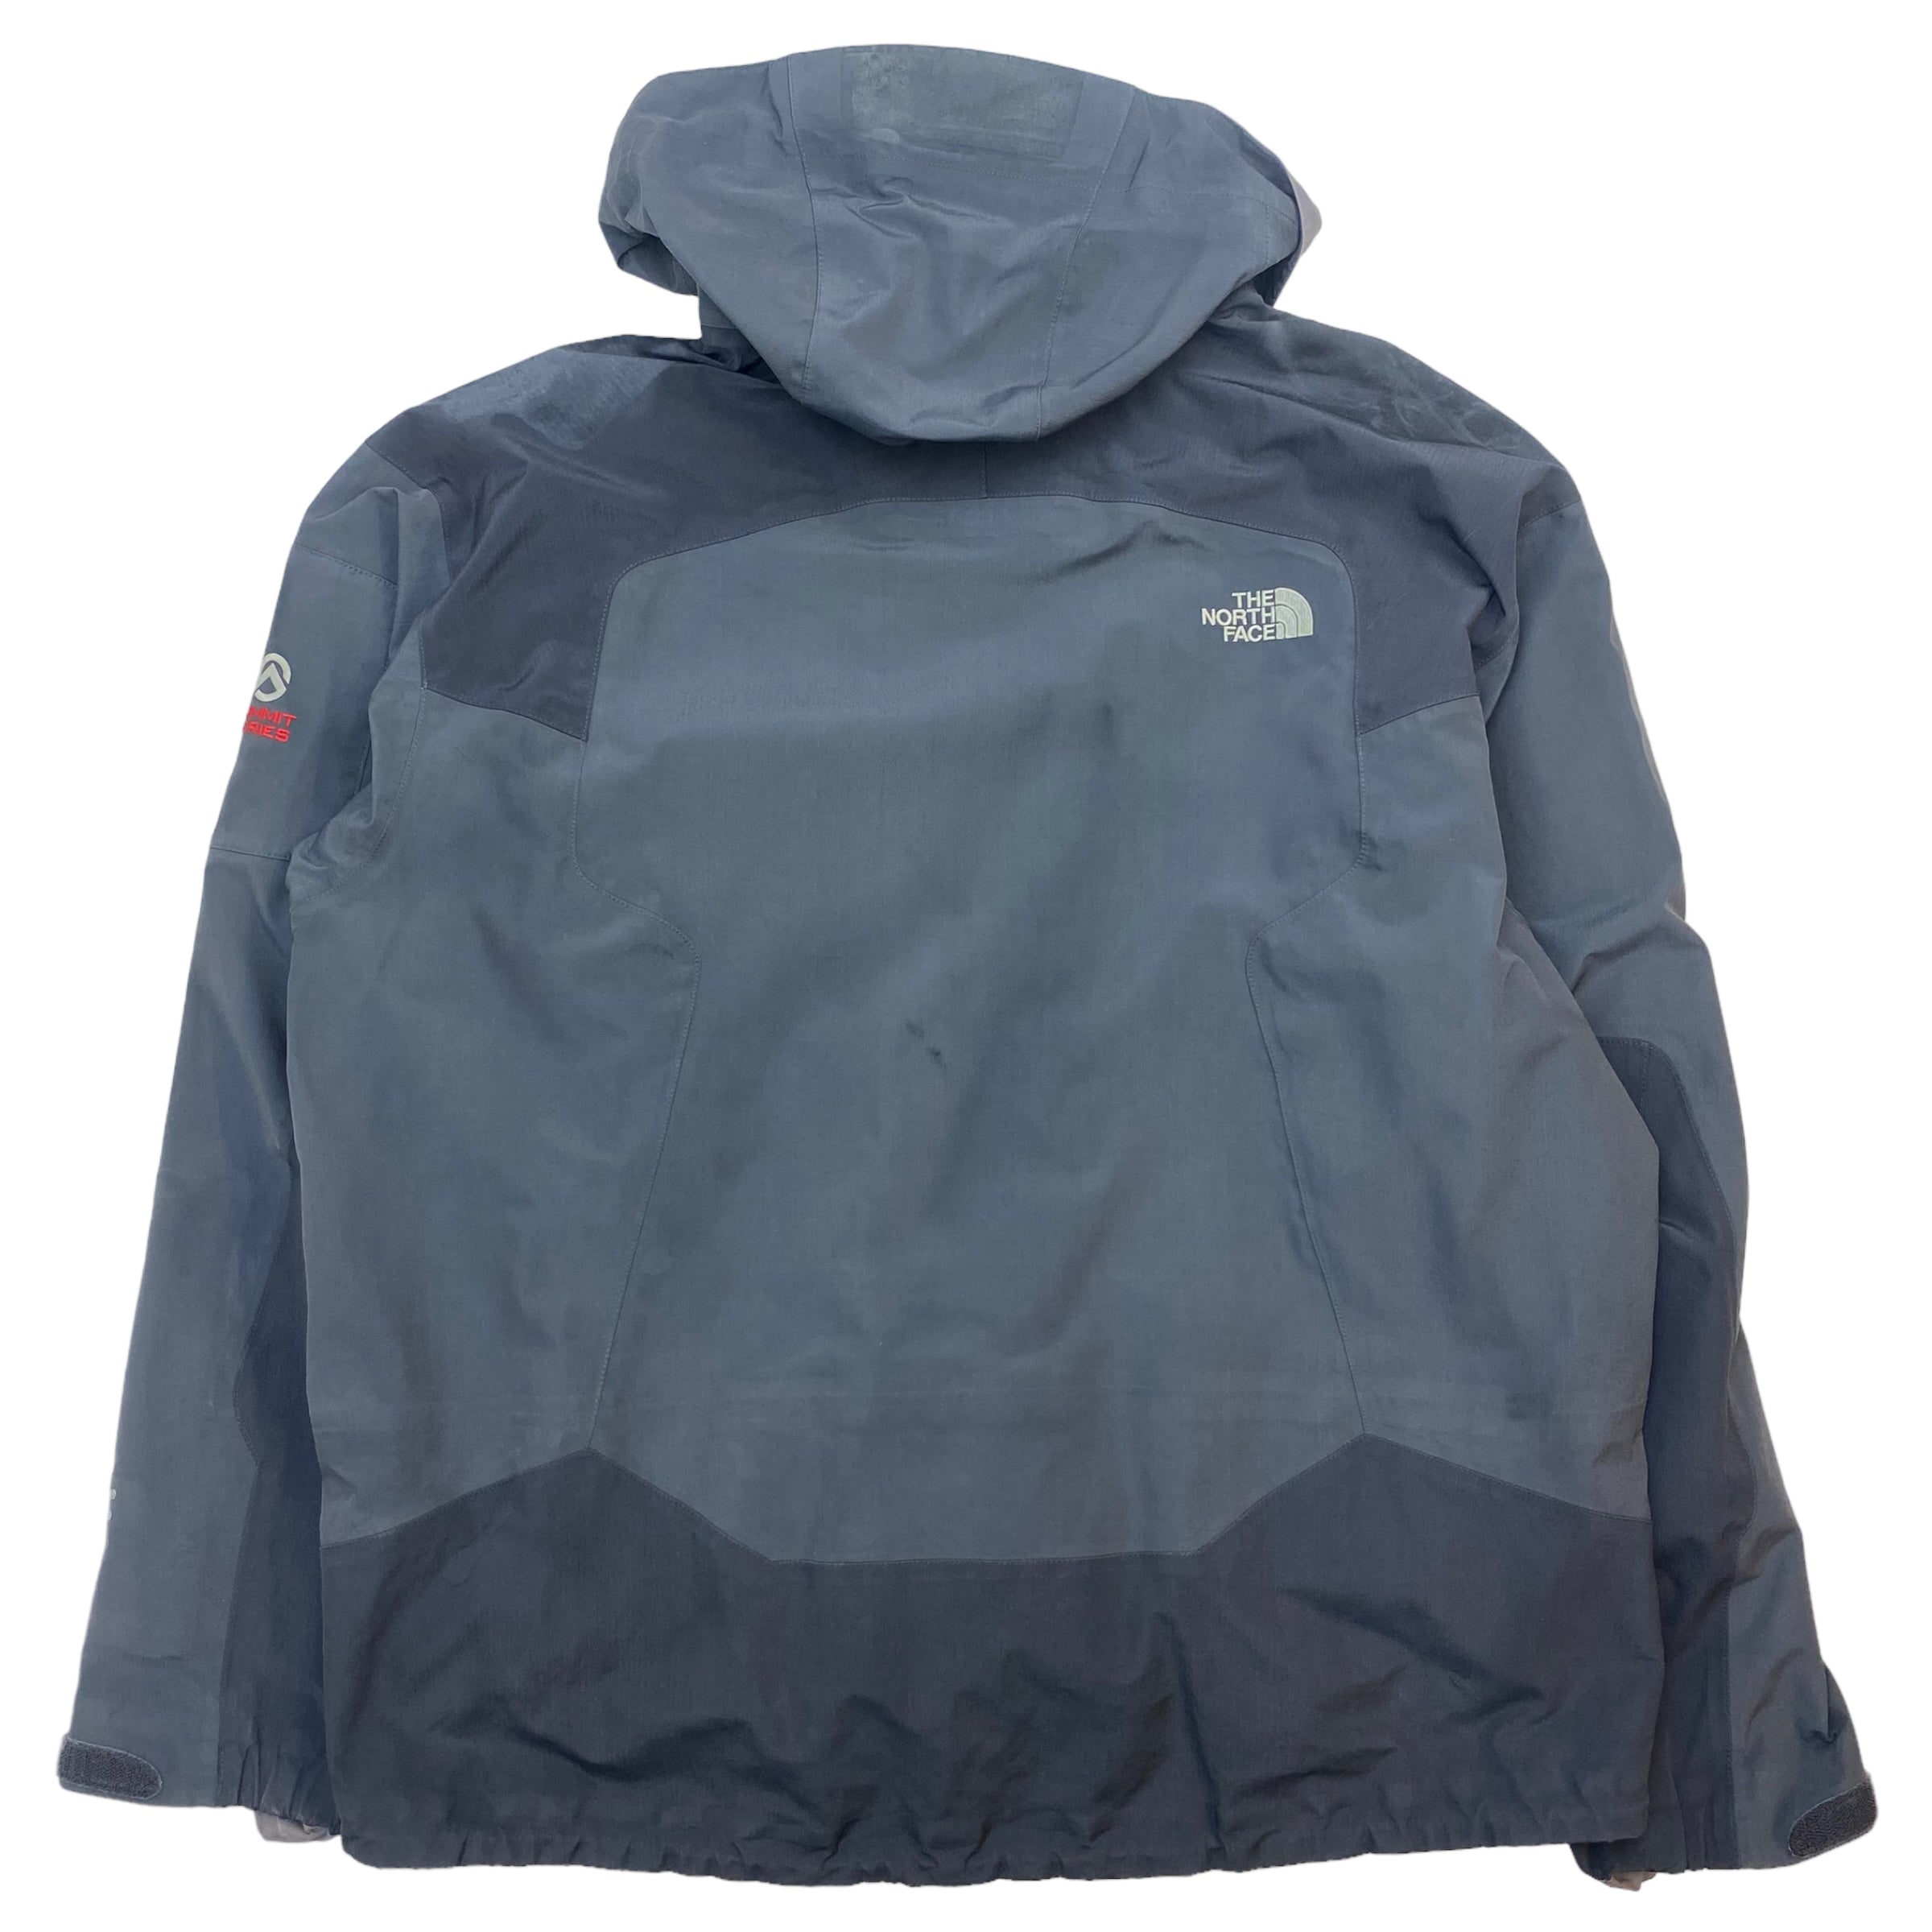 Vintage The North Face Summit Series Gore-Tex XCR Jacket